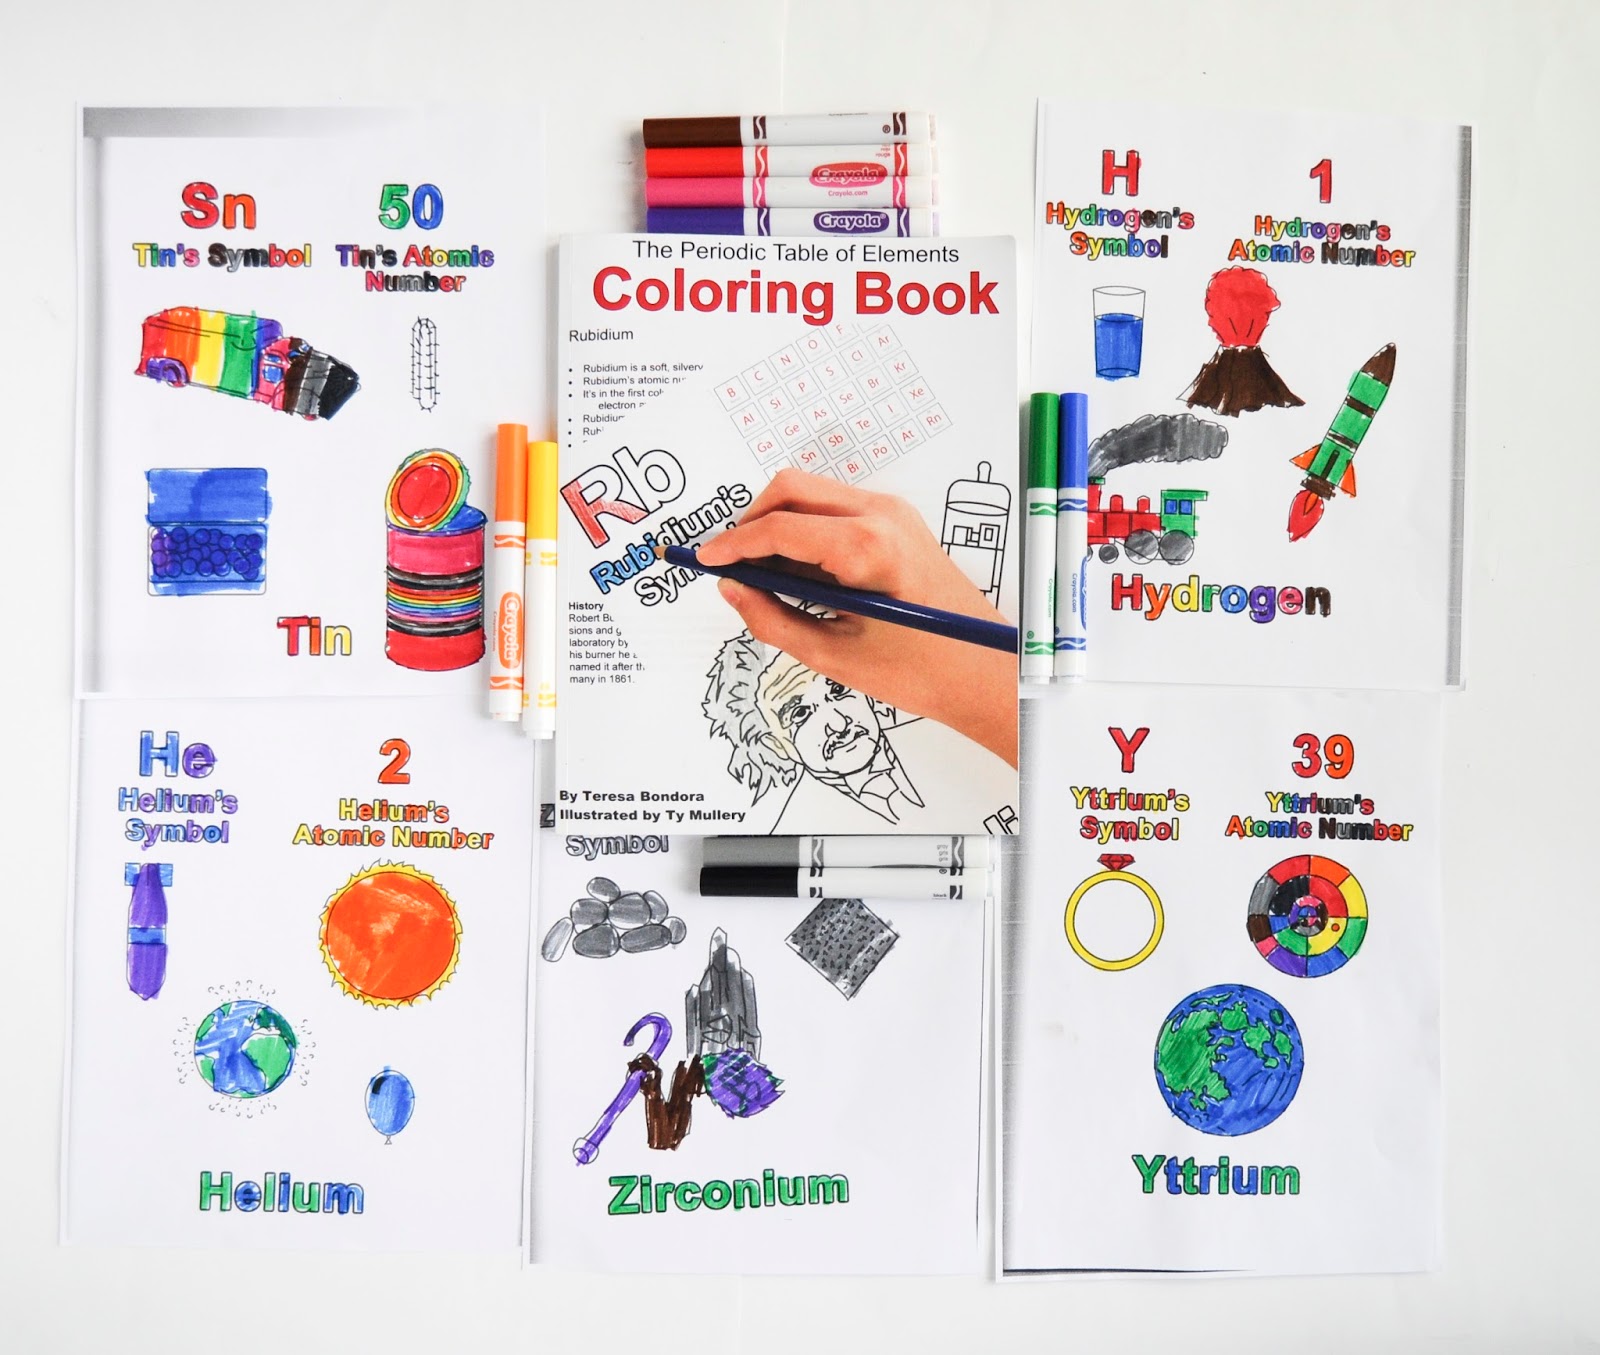 The periodic table of elements coloring book and sciencewear apron review jennys crayon collection